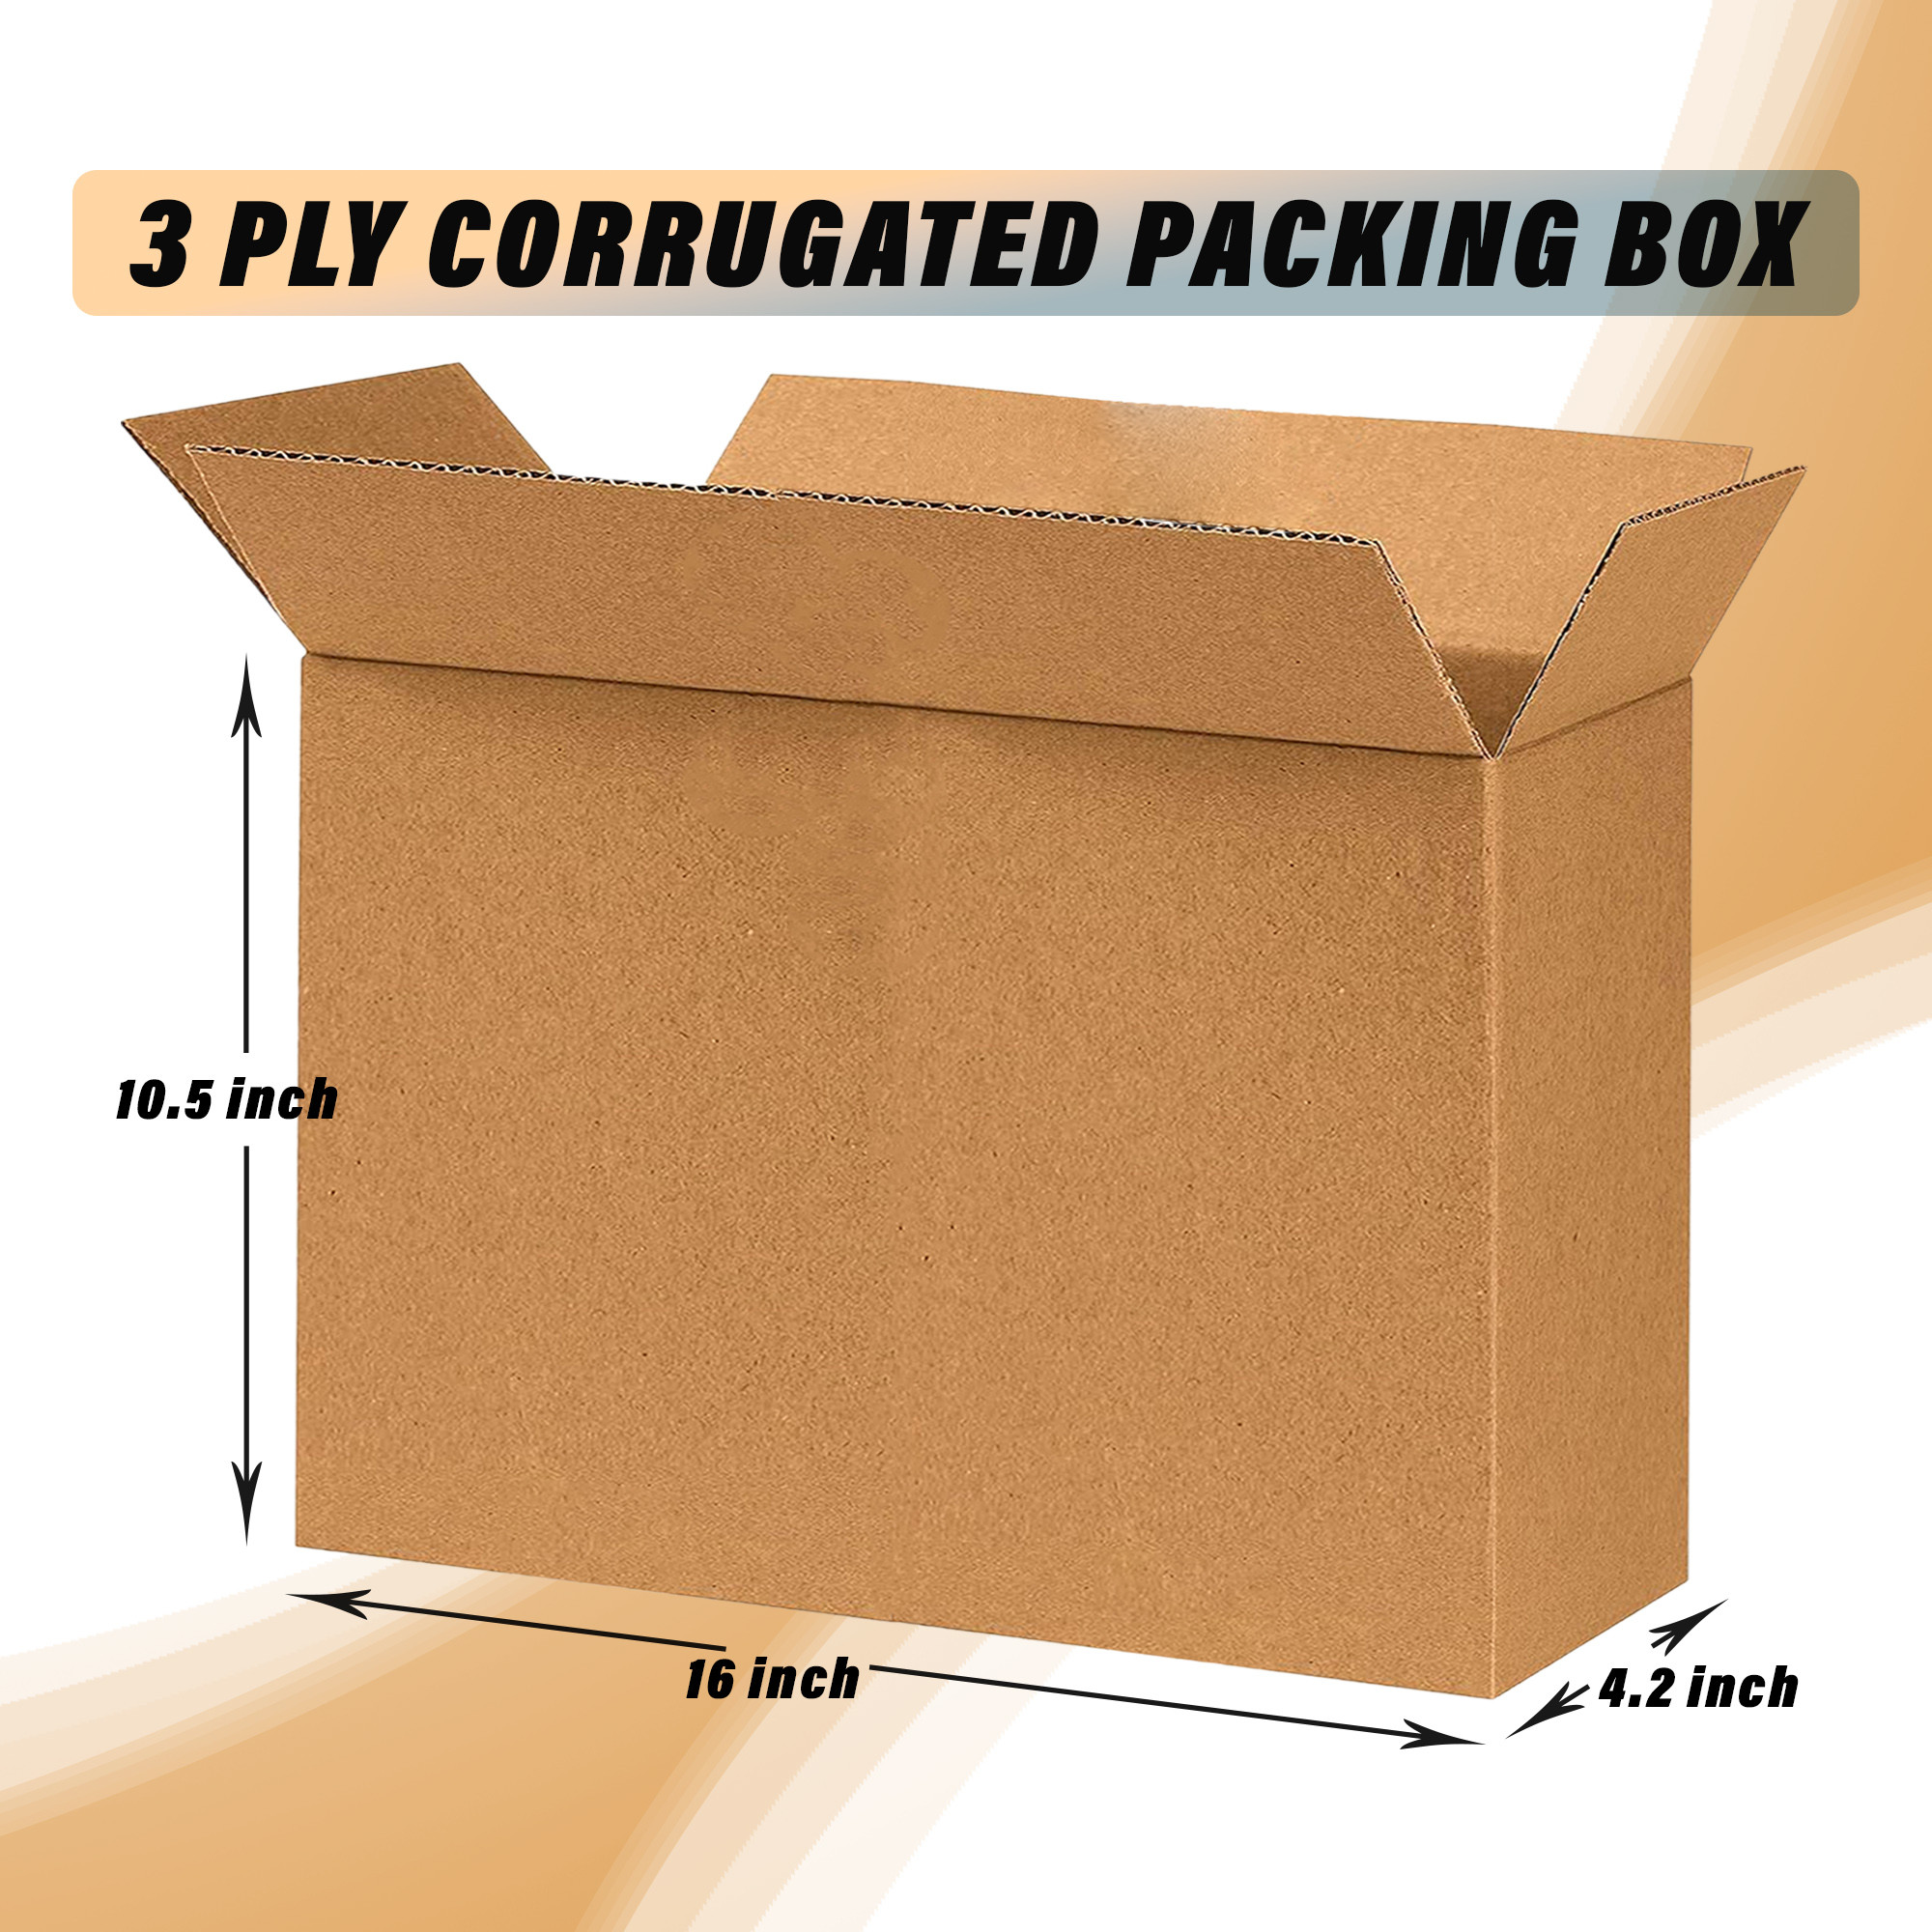 Kuber Industries Corrugated Box | 3 Ply Corrugated Packing Box | Corrugated for Shipping | Corrugated for Courier & Goods Transportation | L 16 x W 4.2 x H 10.5 Inch| Brown